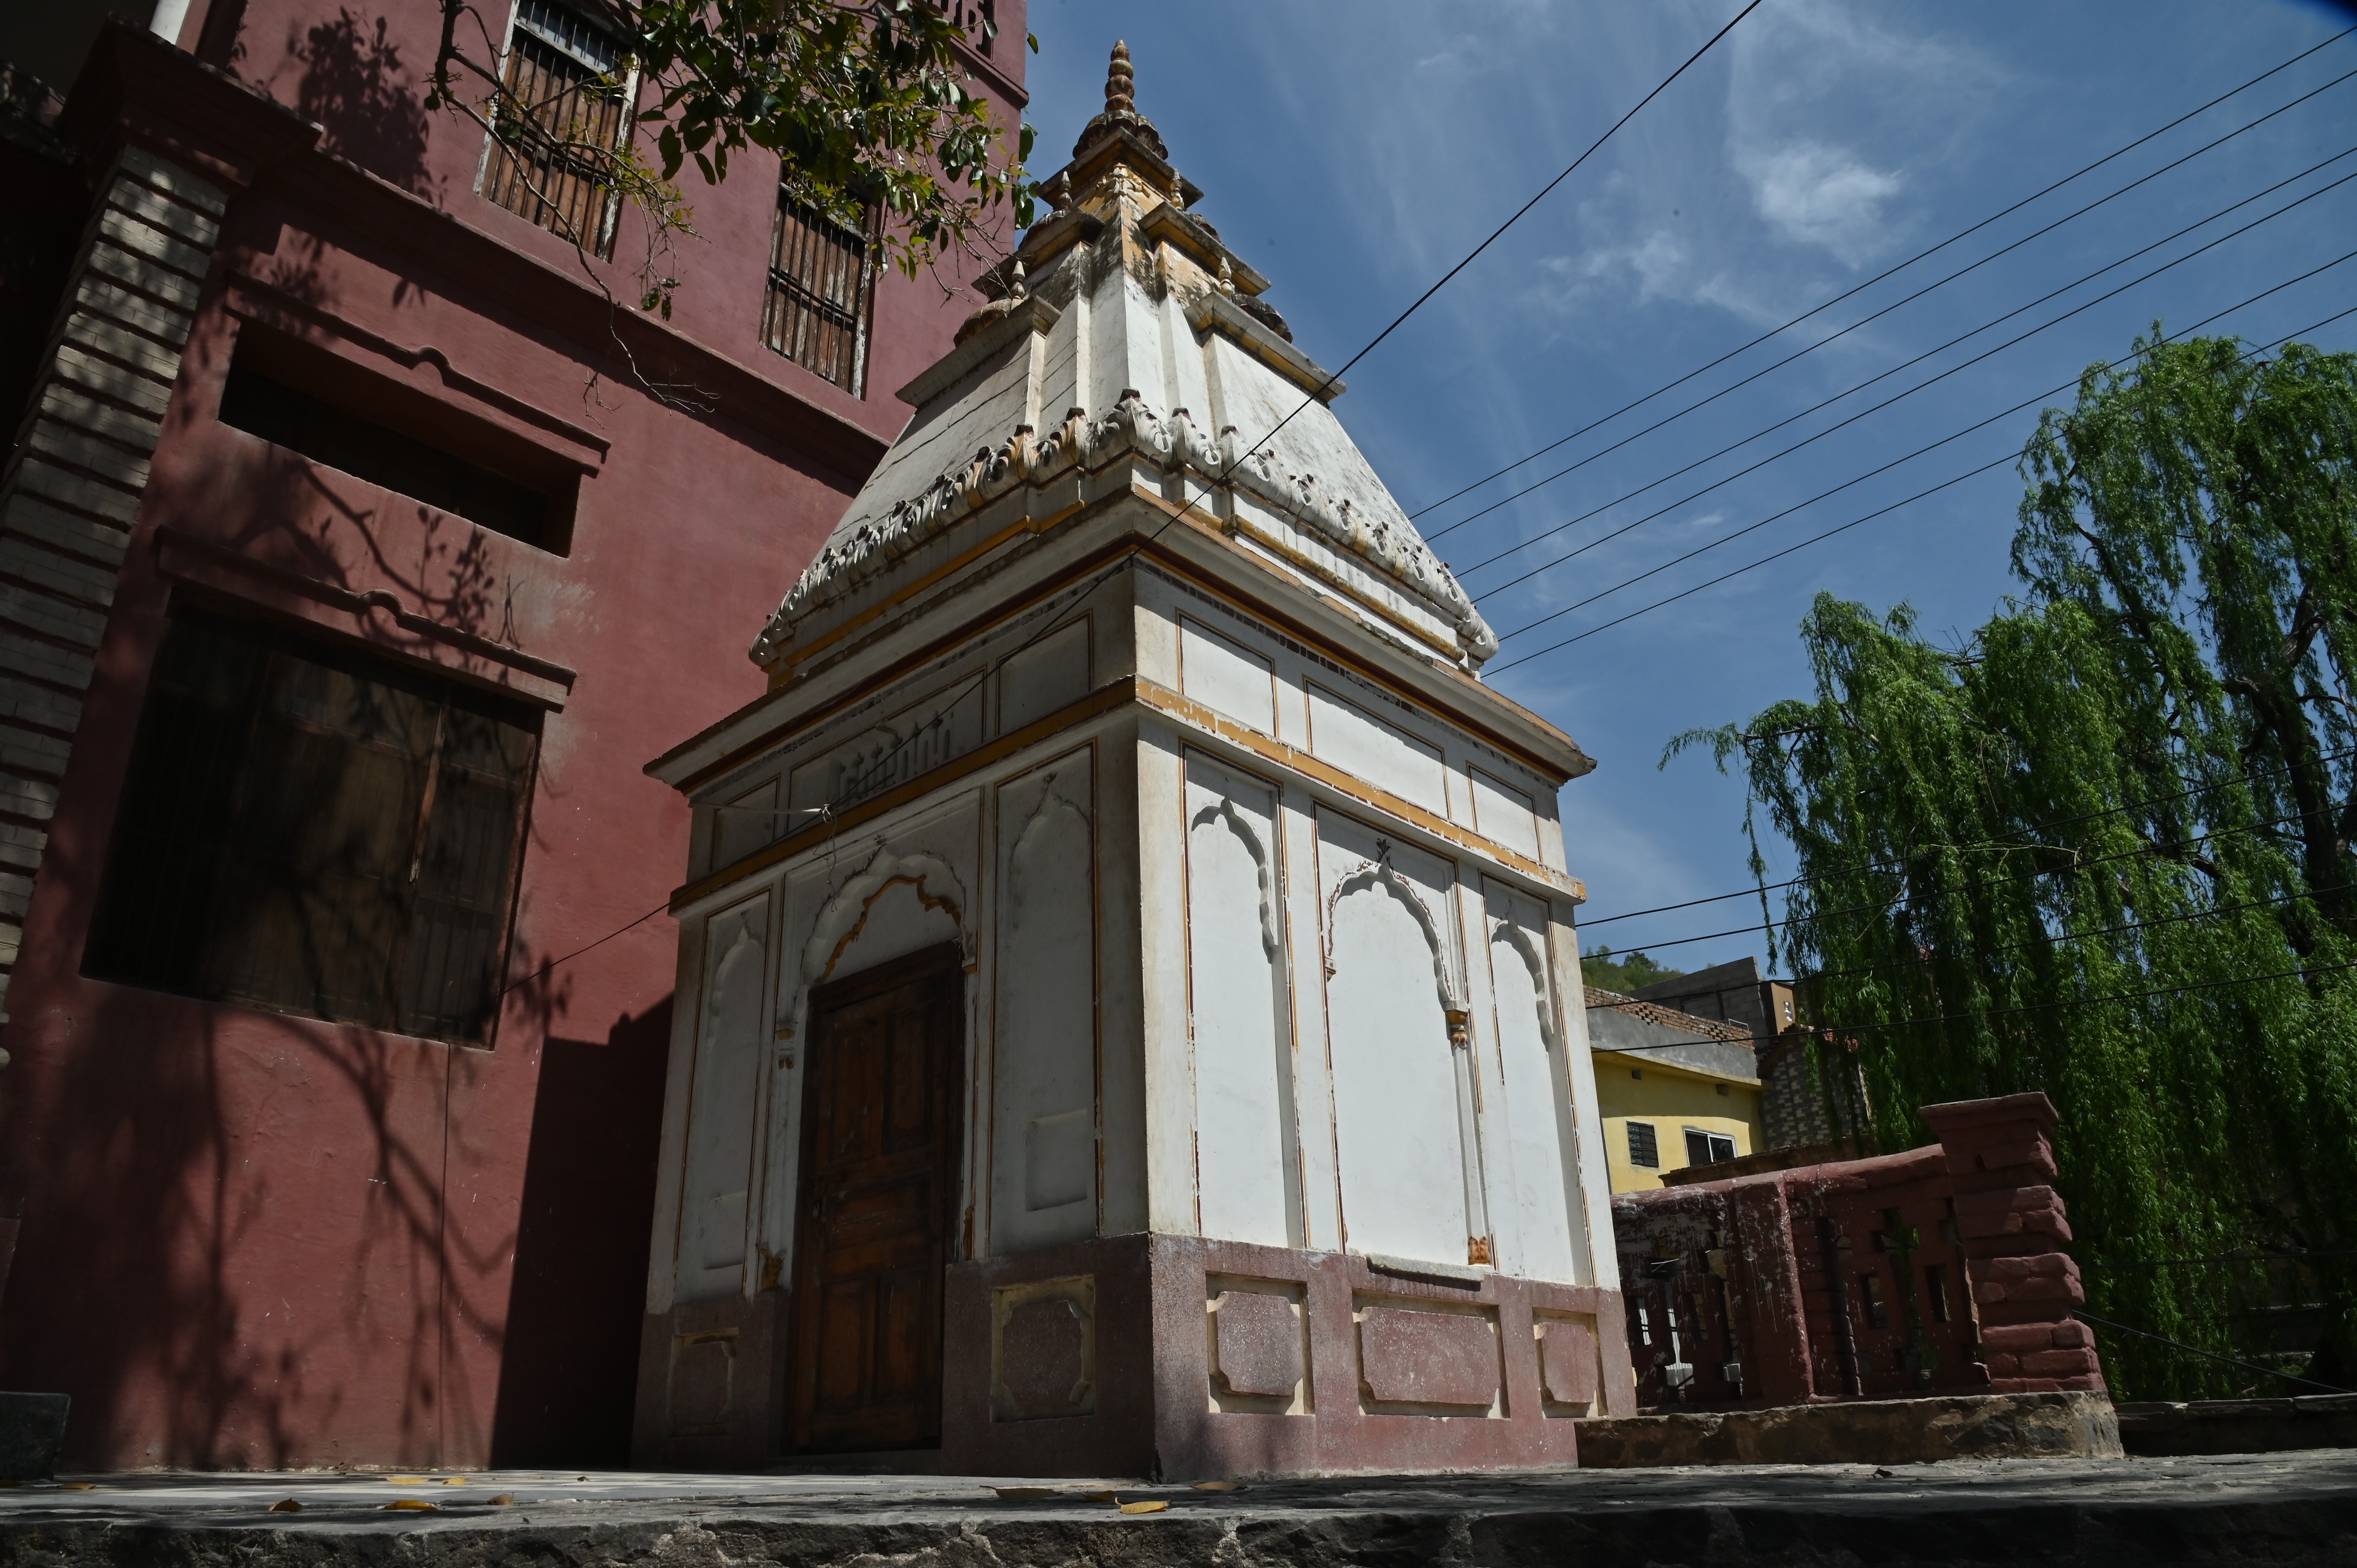 The historic temple